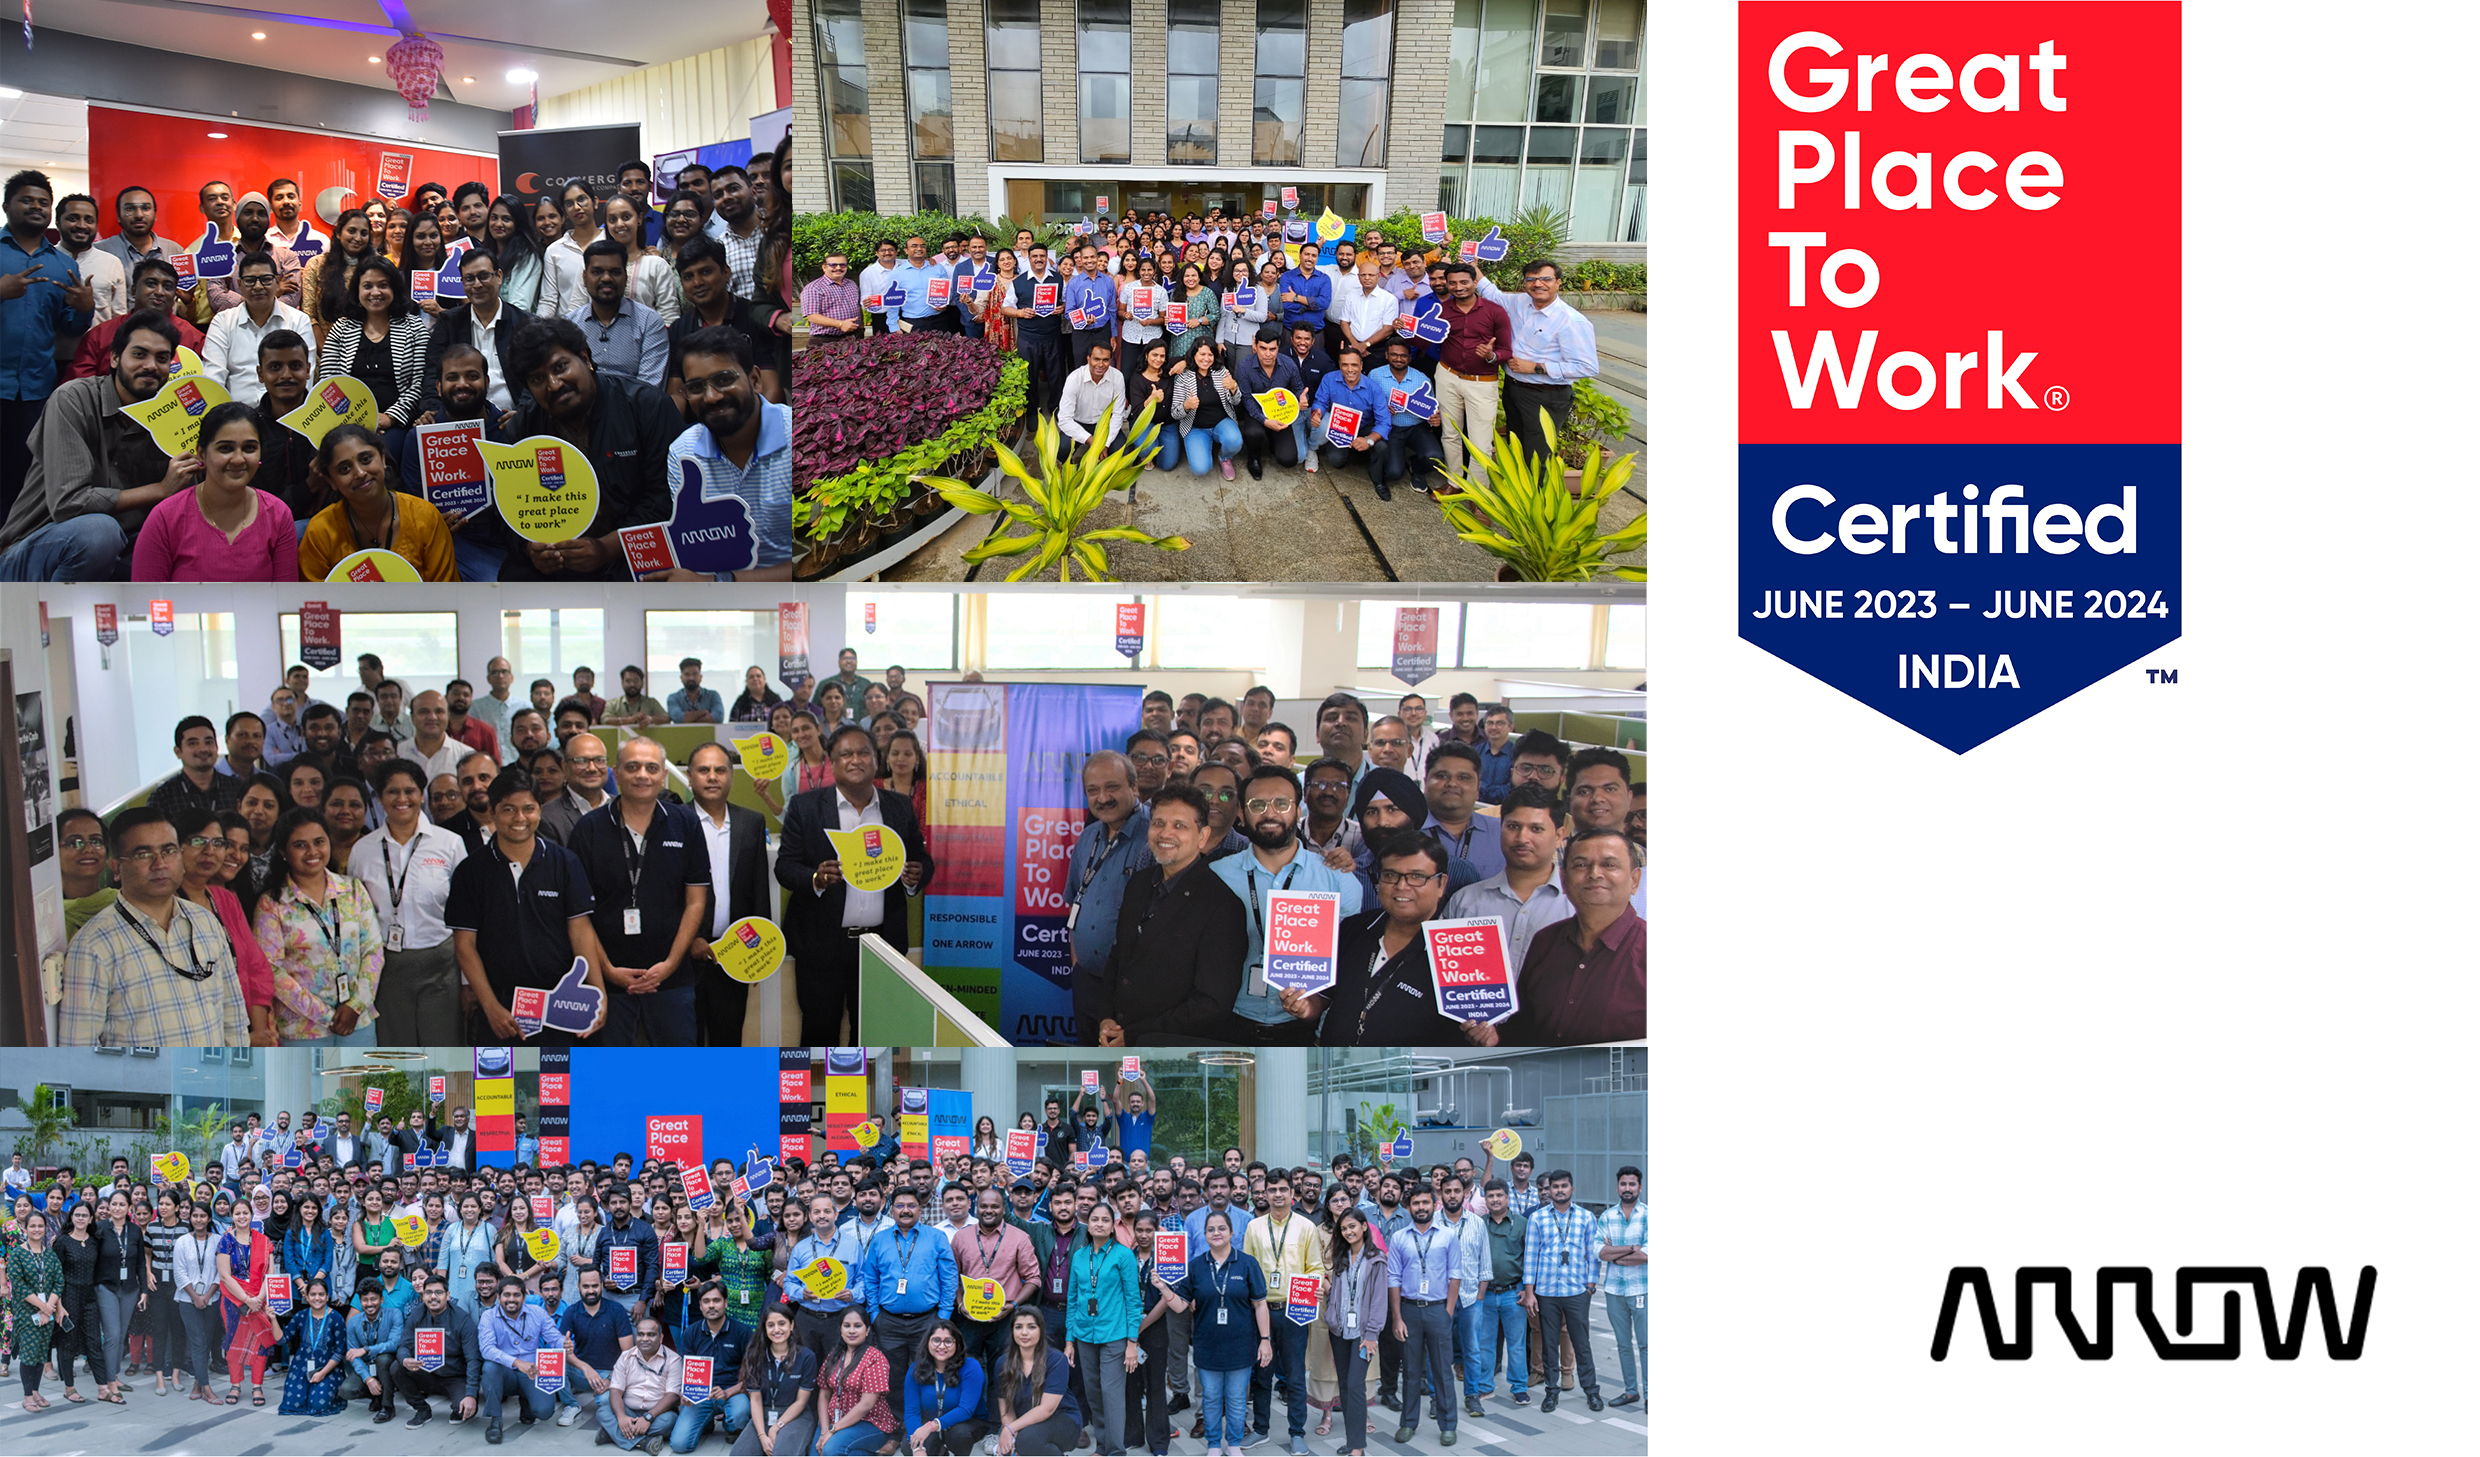 arrow electronics earns great place to work certification in india